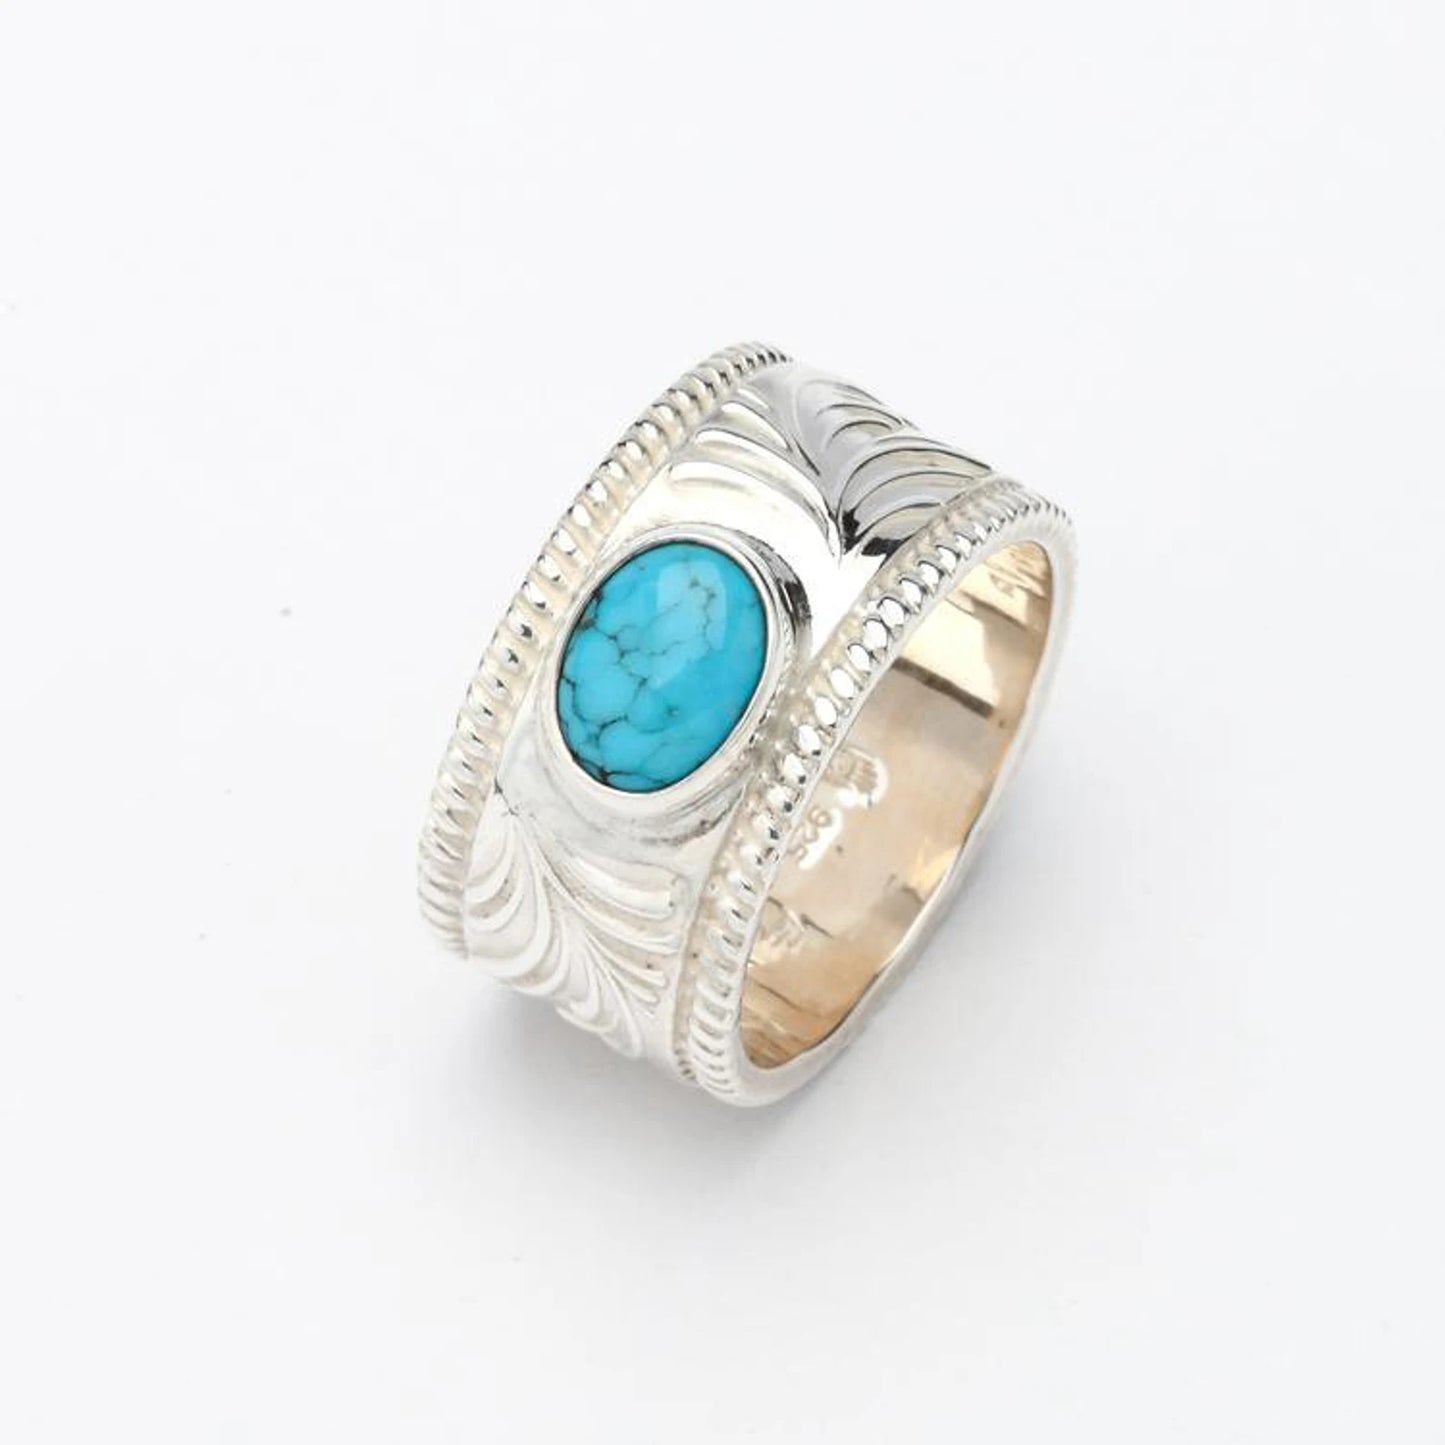 Tribal Floral Totem Engraved Turquoise Ring